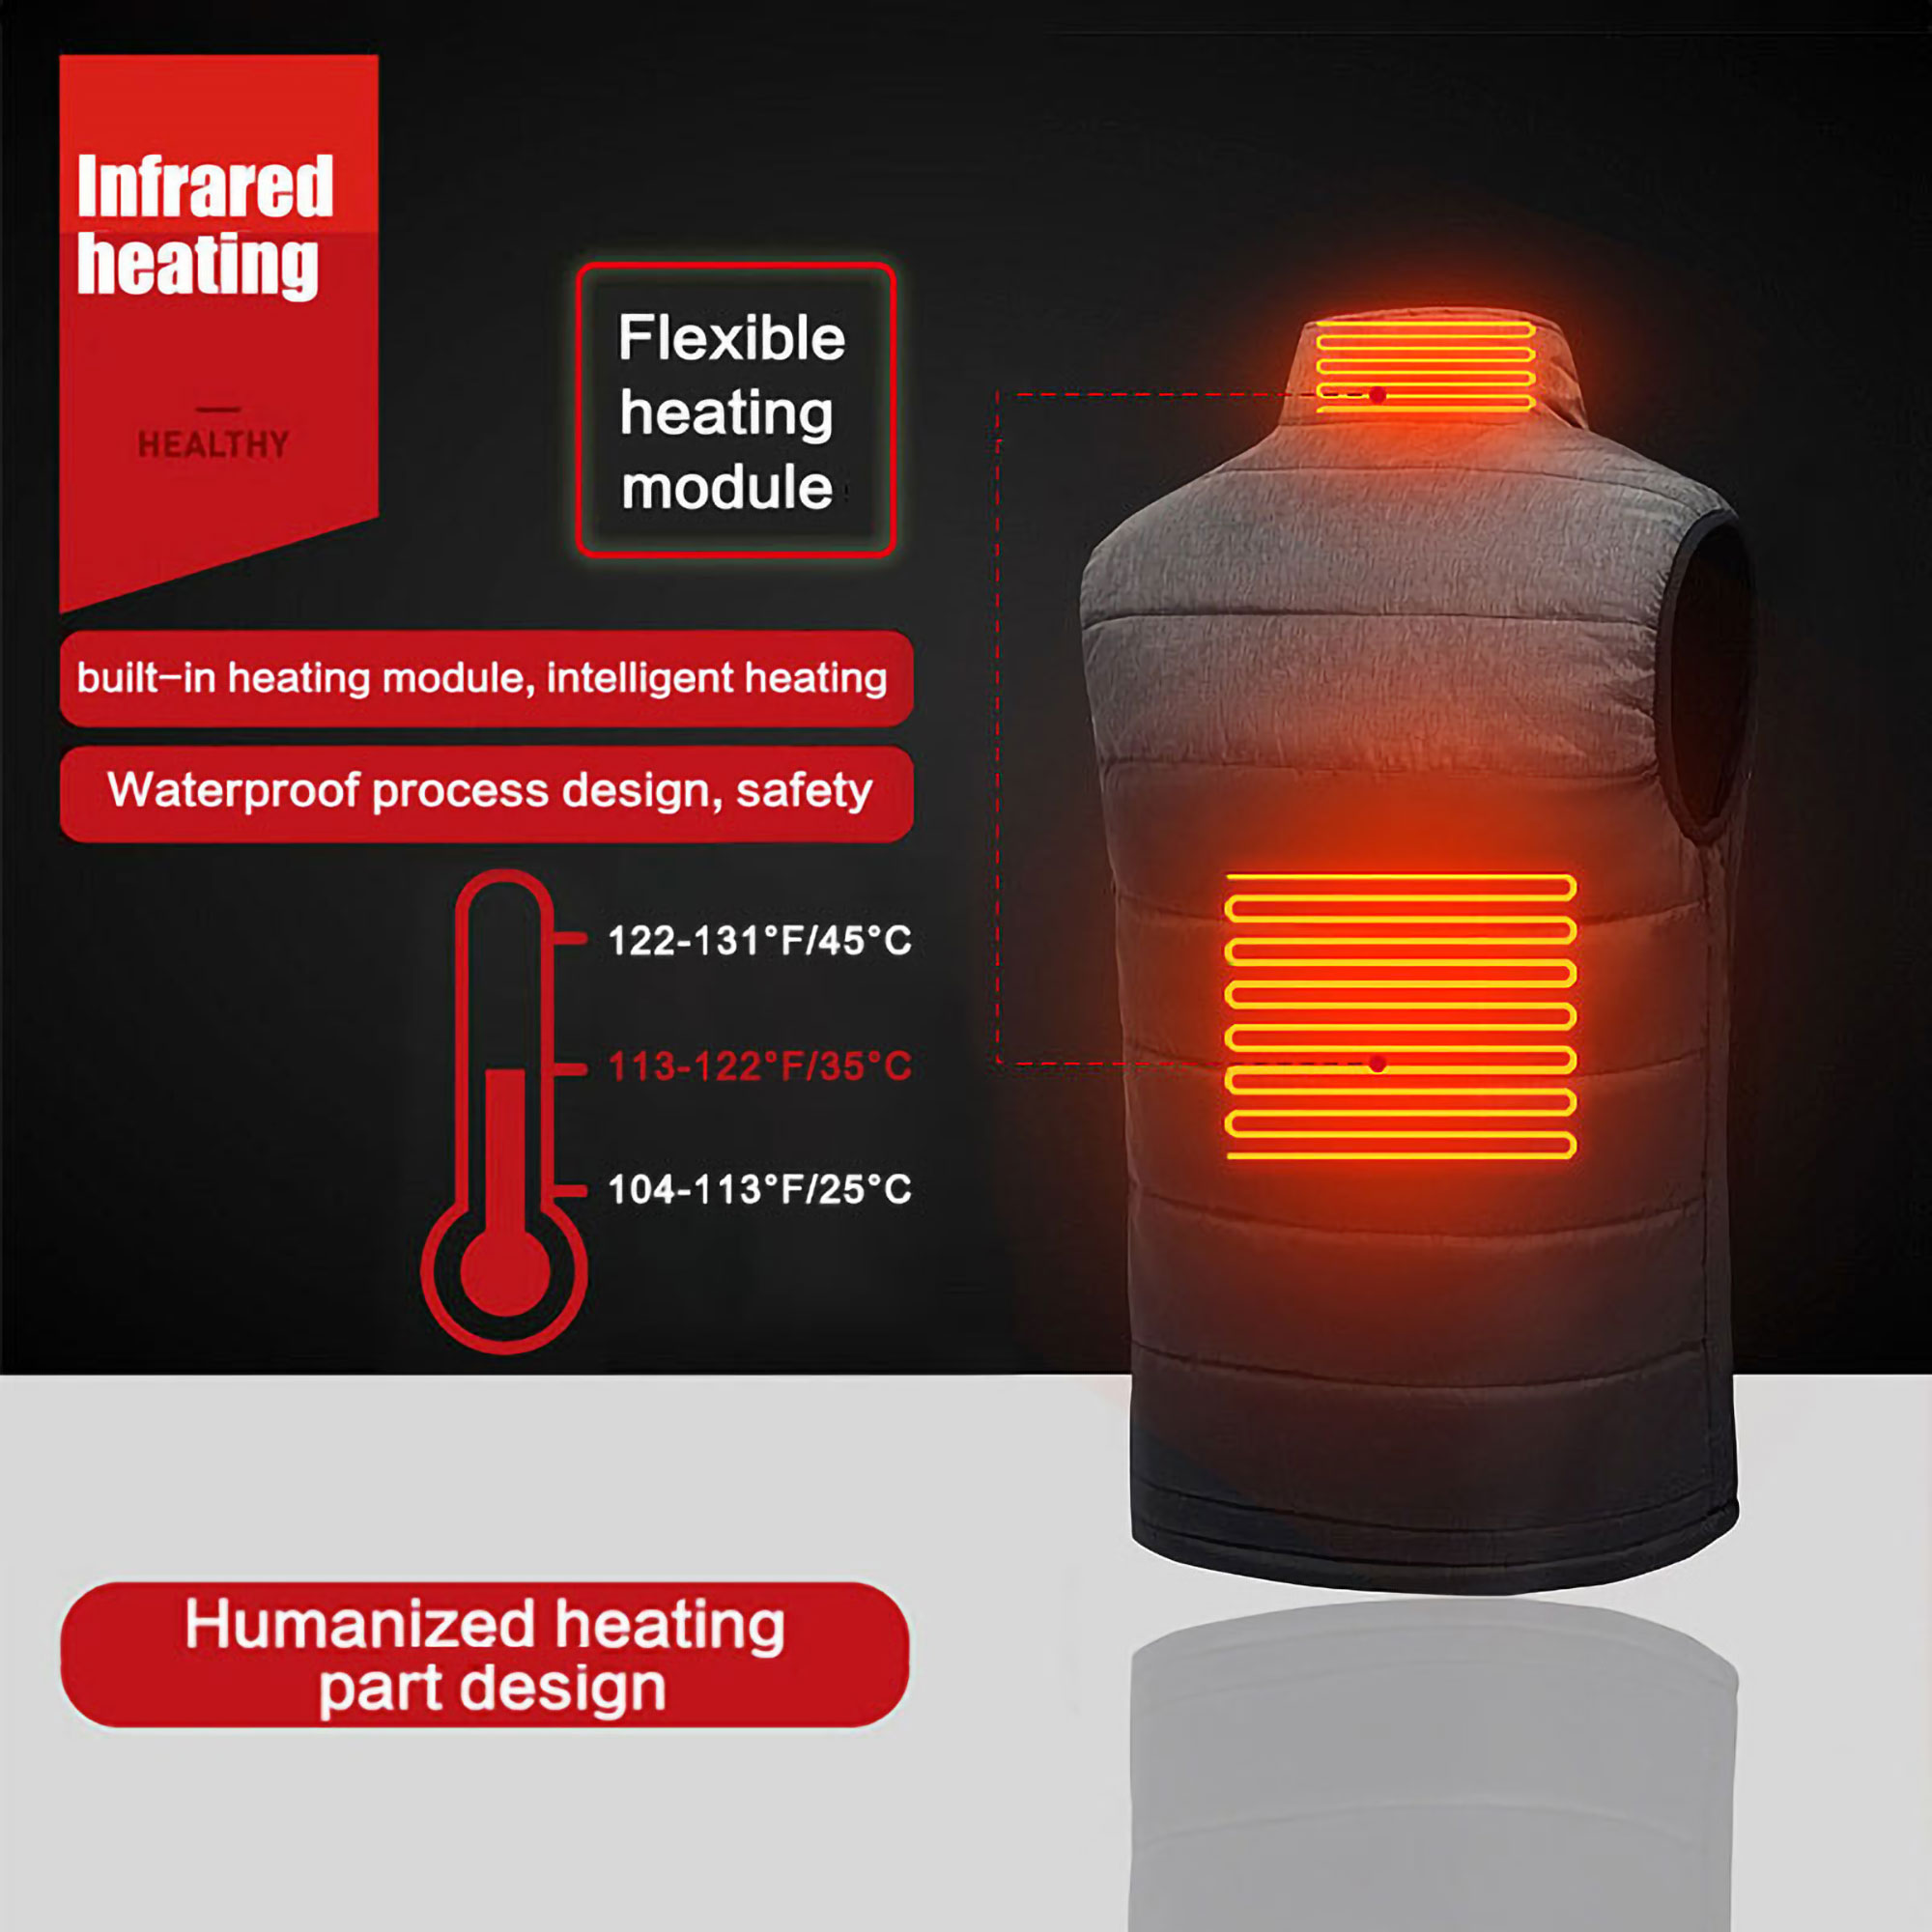 Sexy Dance Electric Heated Vest for Men Women Heating Jacket Sleeveless Zipper Coat Lightweight Thermal Outwear With 10000mHA Power Bank - image 5 of 11